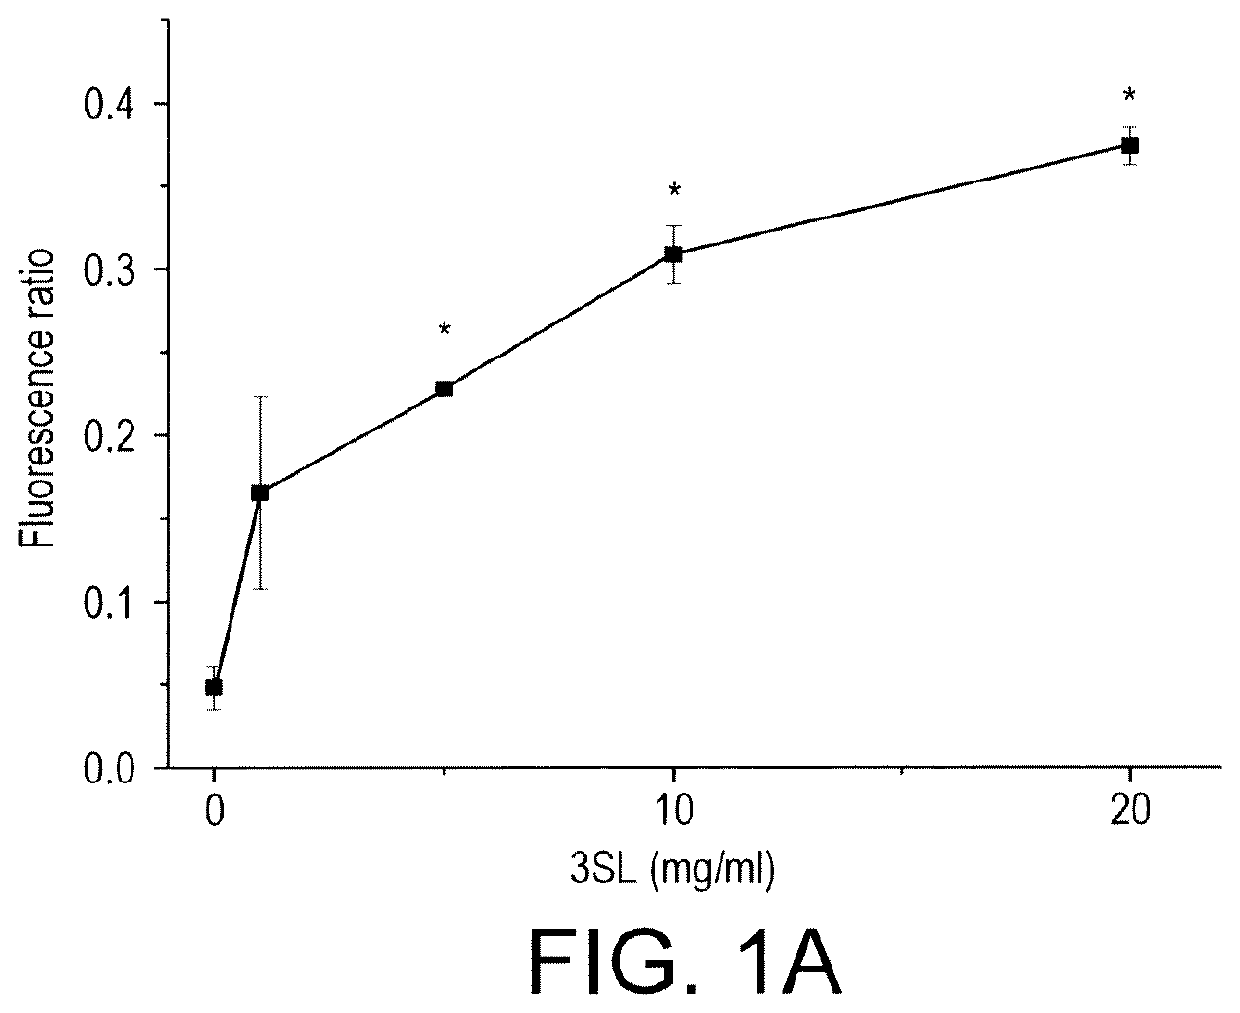 Compositions comprising sialylated oligosaccharides for use in infants or young children to prevent later in life obesity or related comorbidities and promote a healthy growth